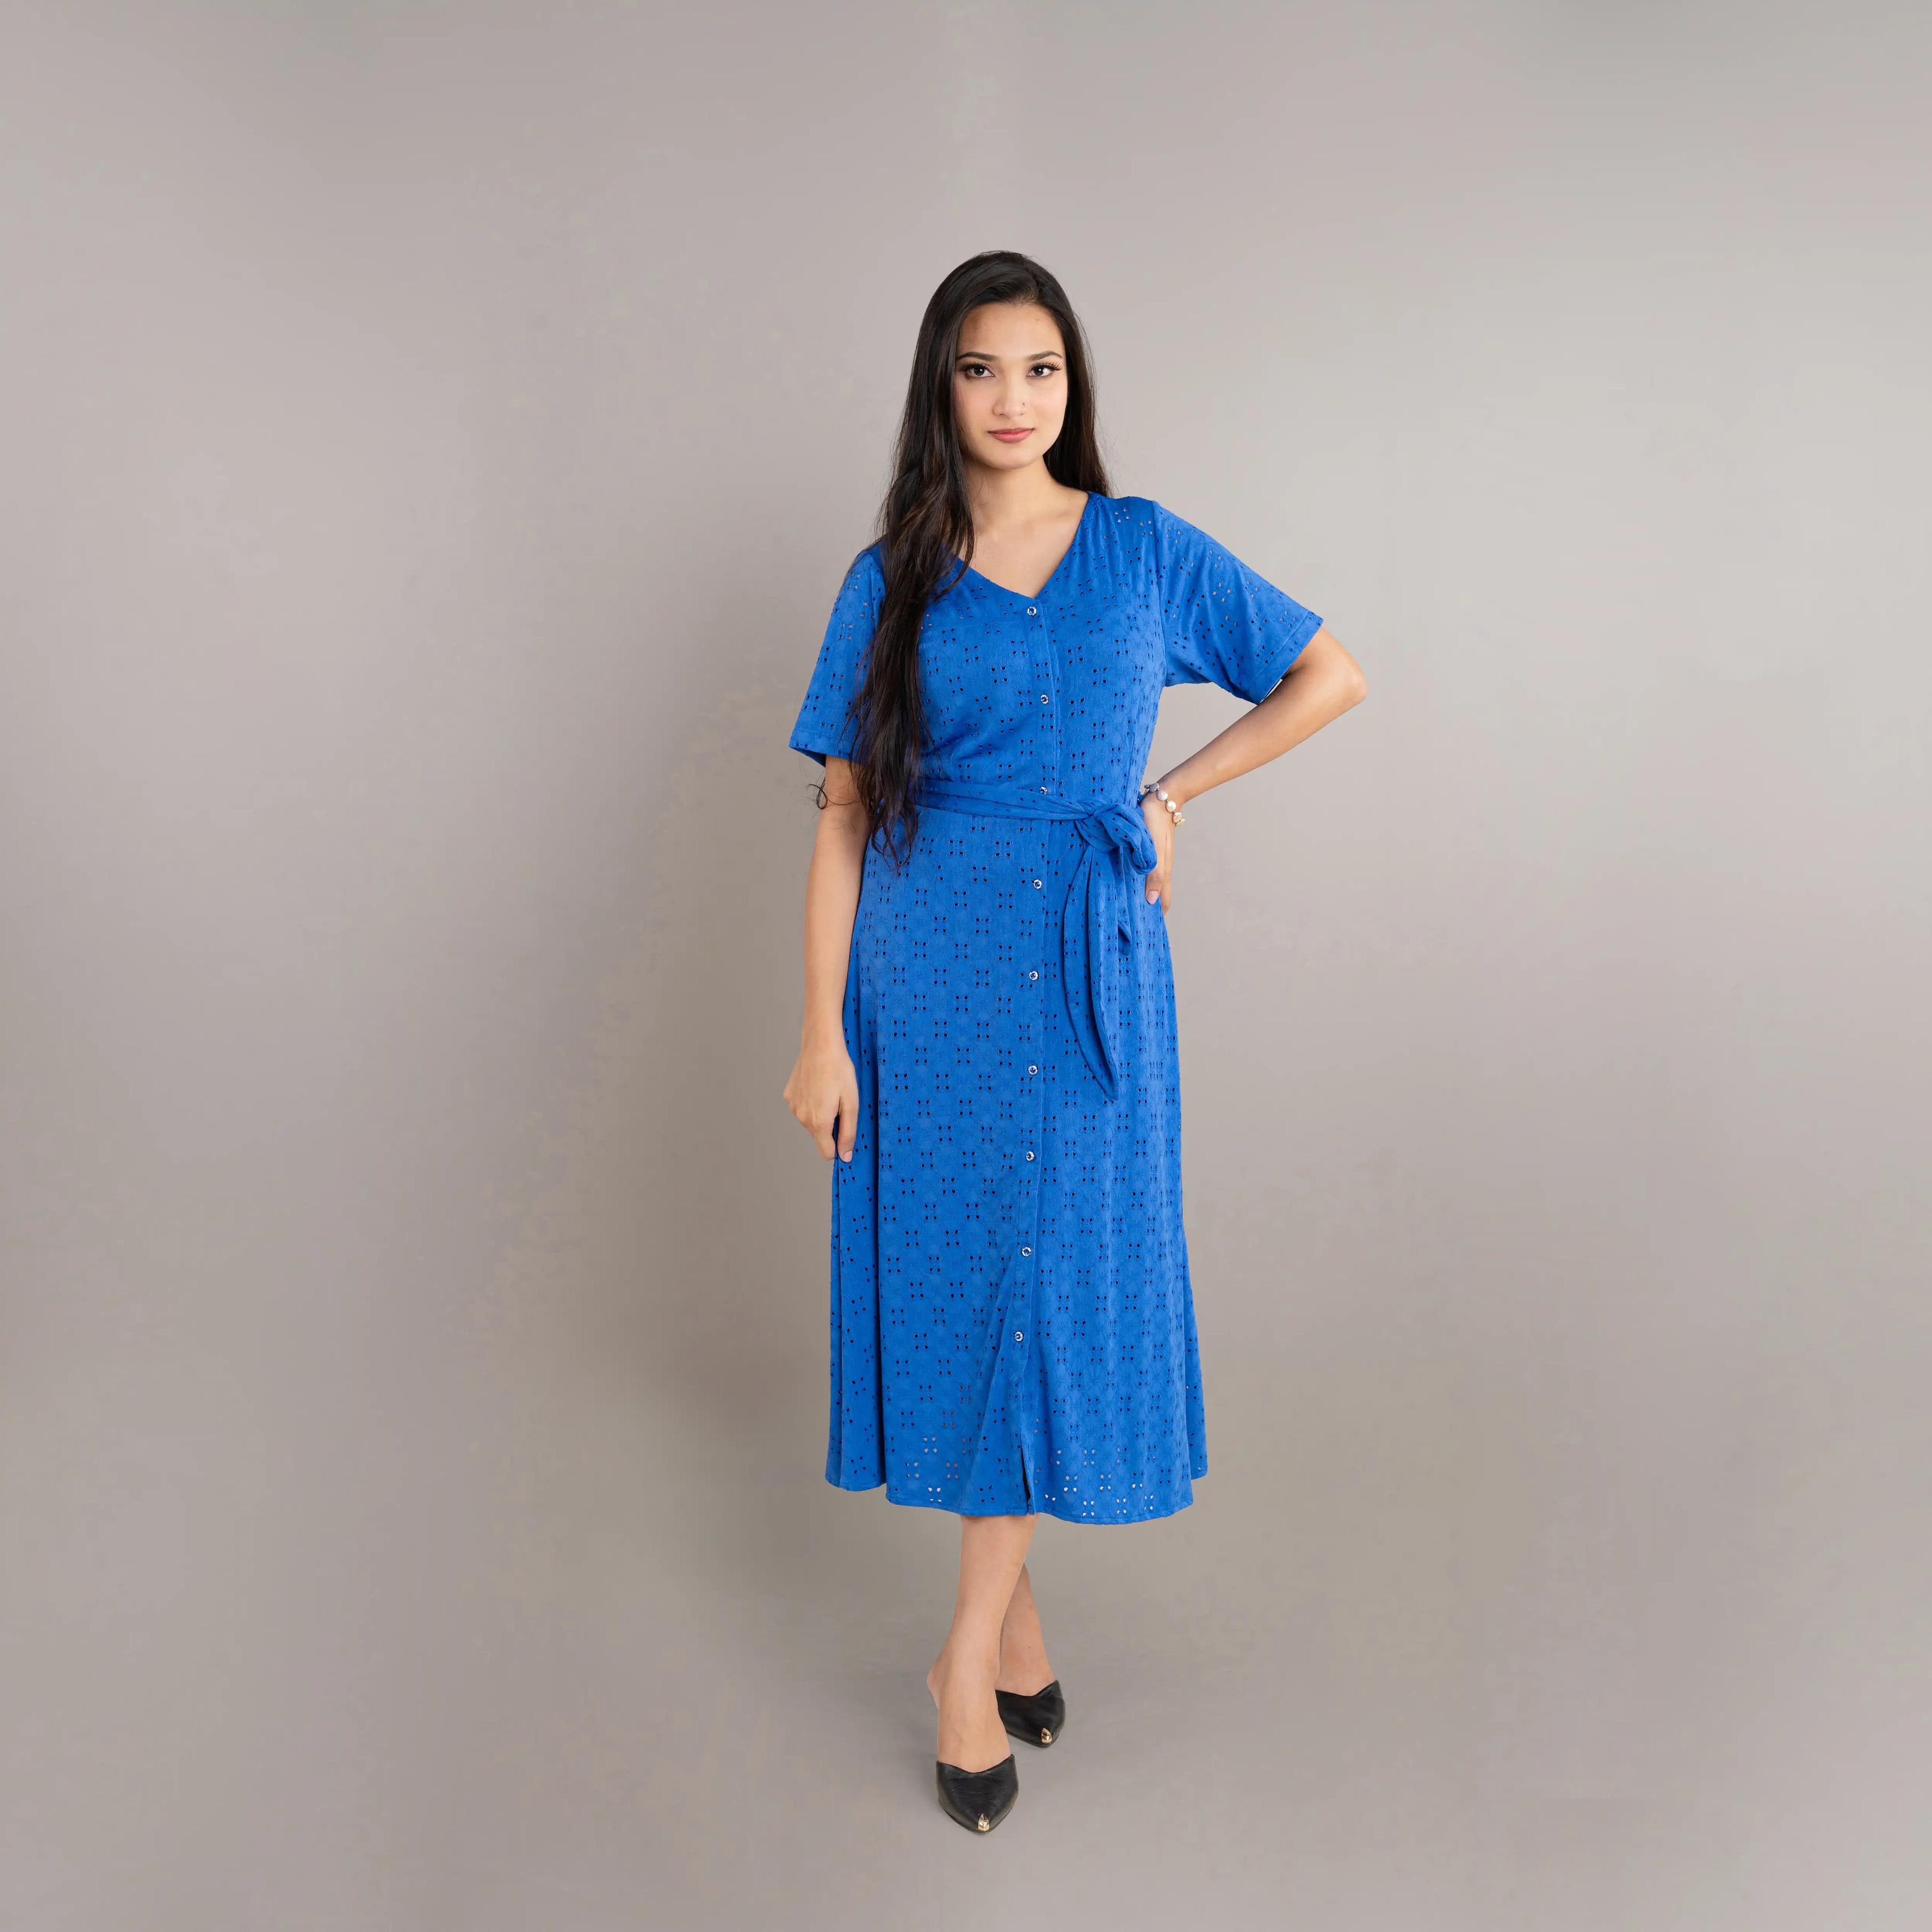 Giff Lace knitted Front Button Dress (Royal Blue)